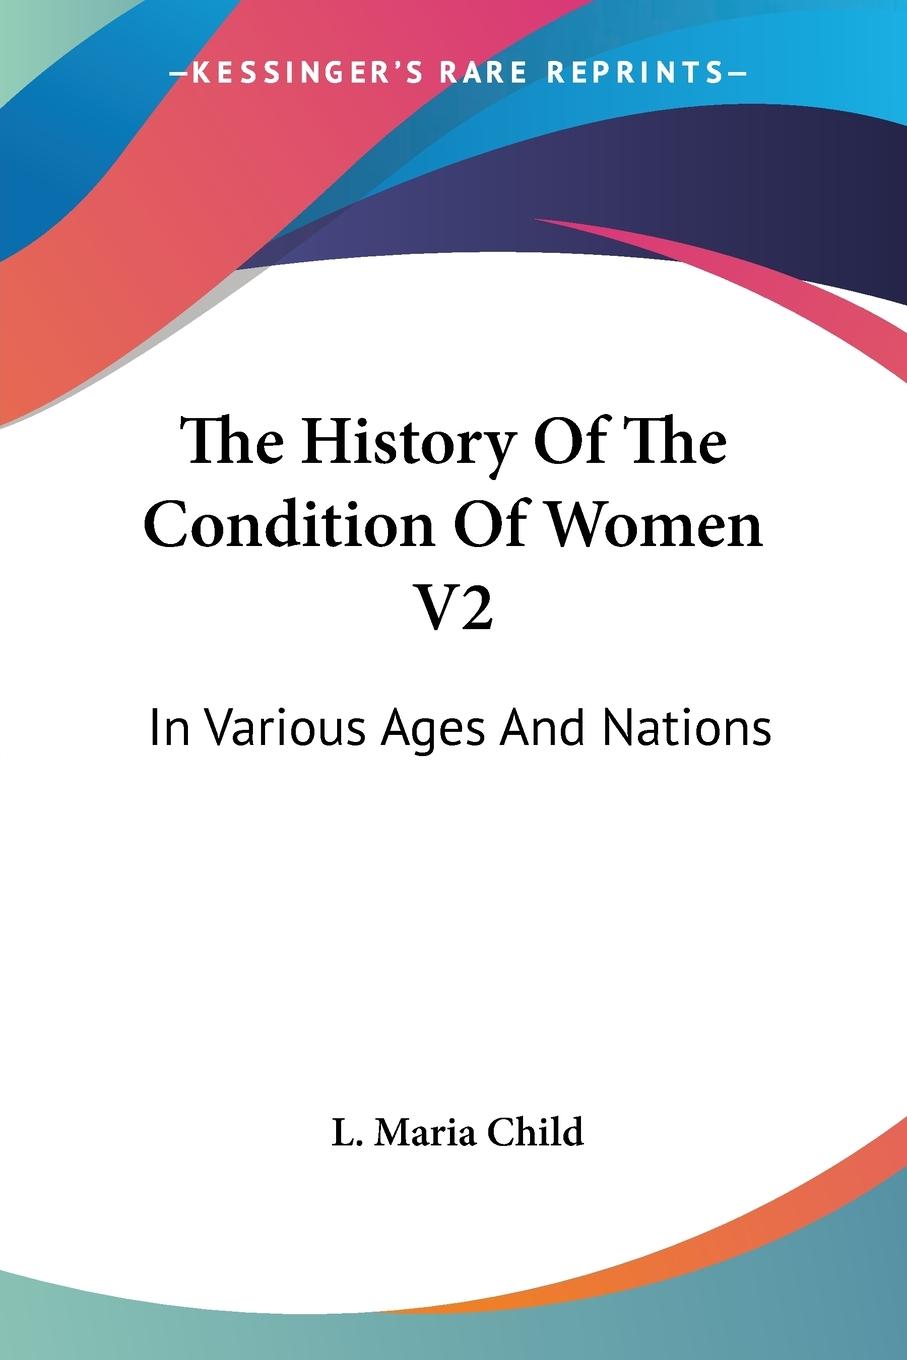 The History Of The Condition Of Women V2 - Child, L. Maria